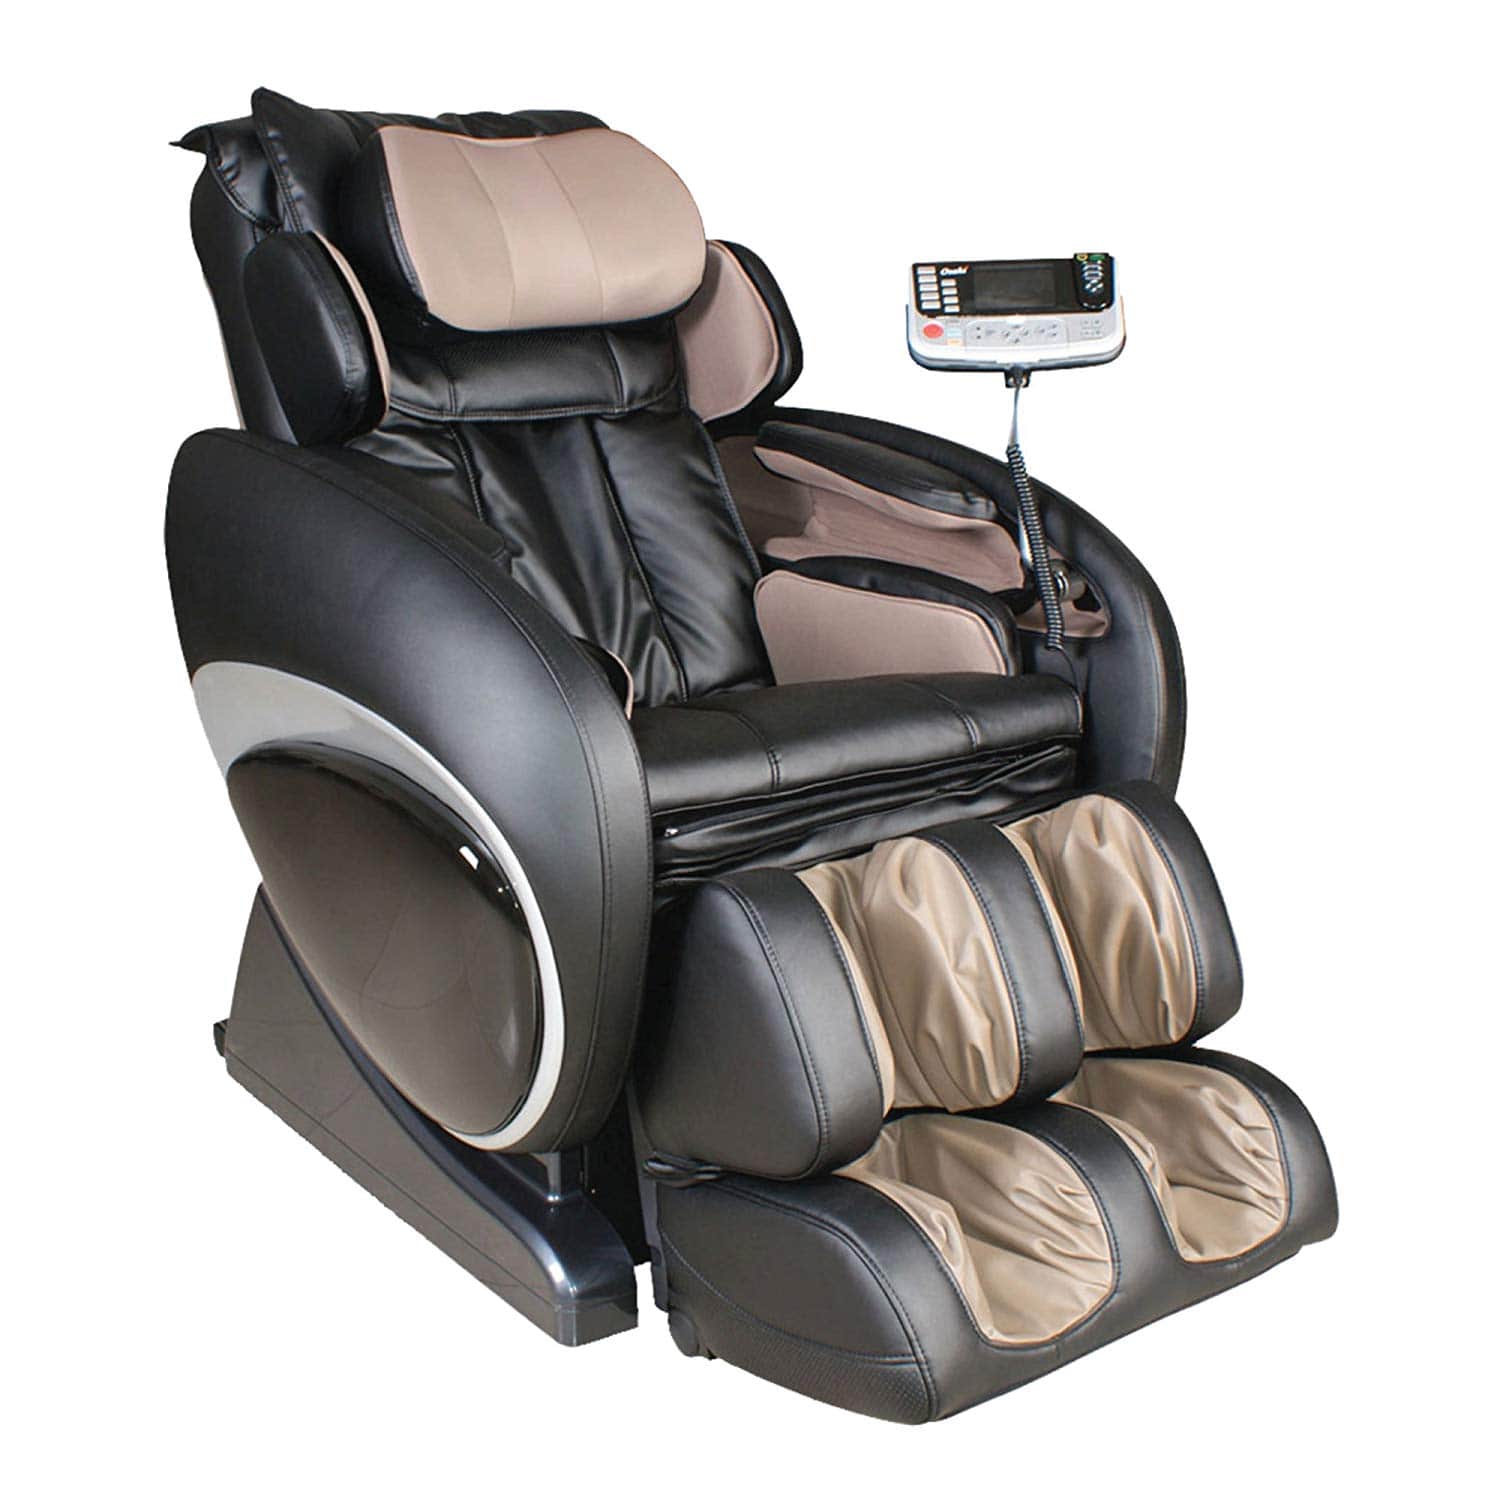 7 Cheap Massage Chairs For Sale 2021 1 Affordable Brand